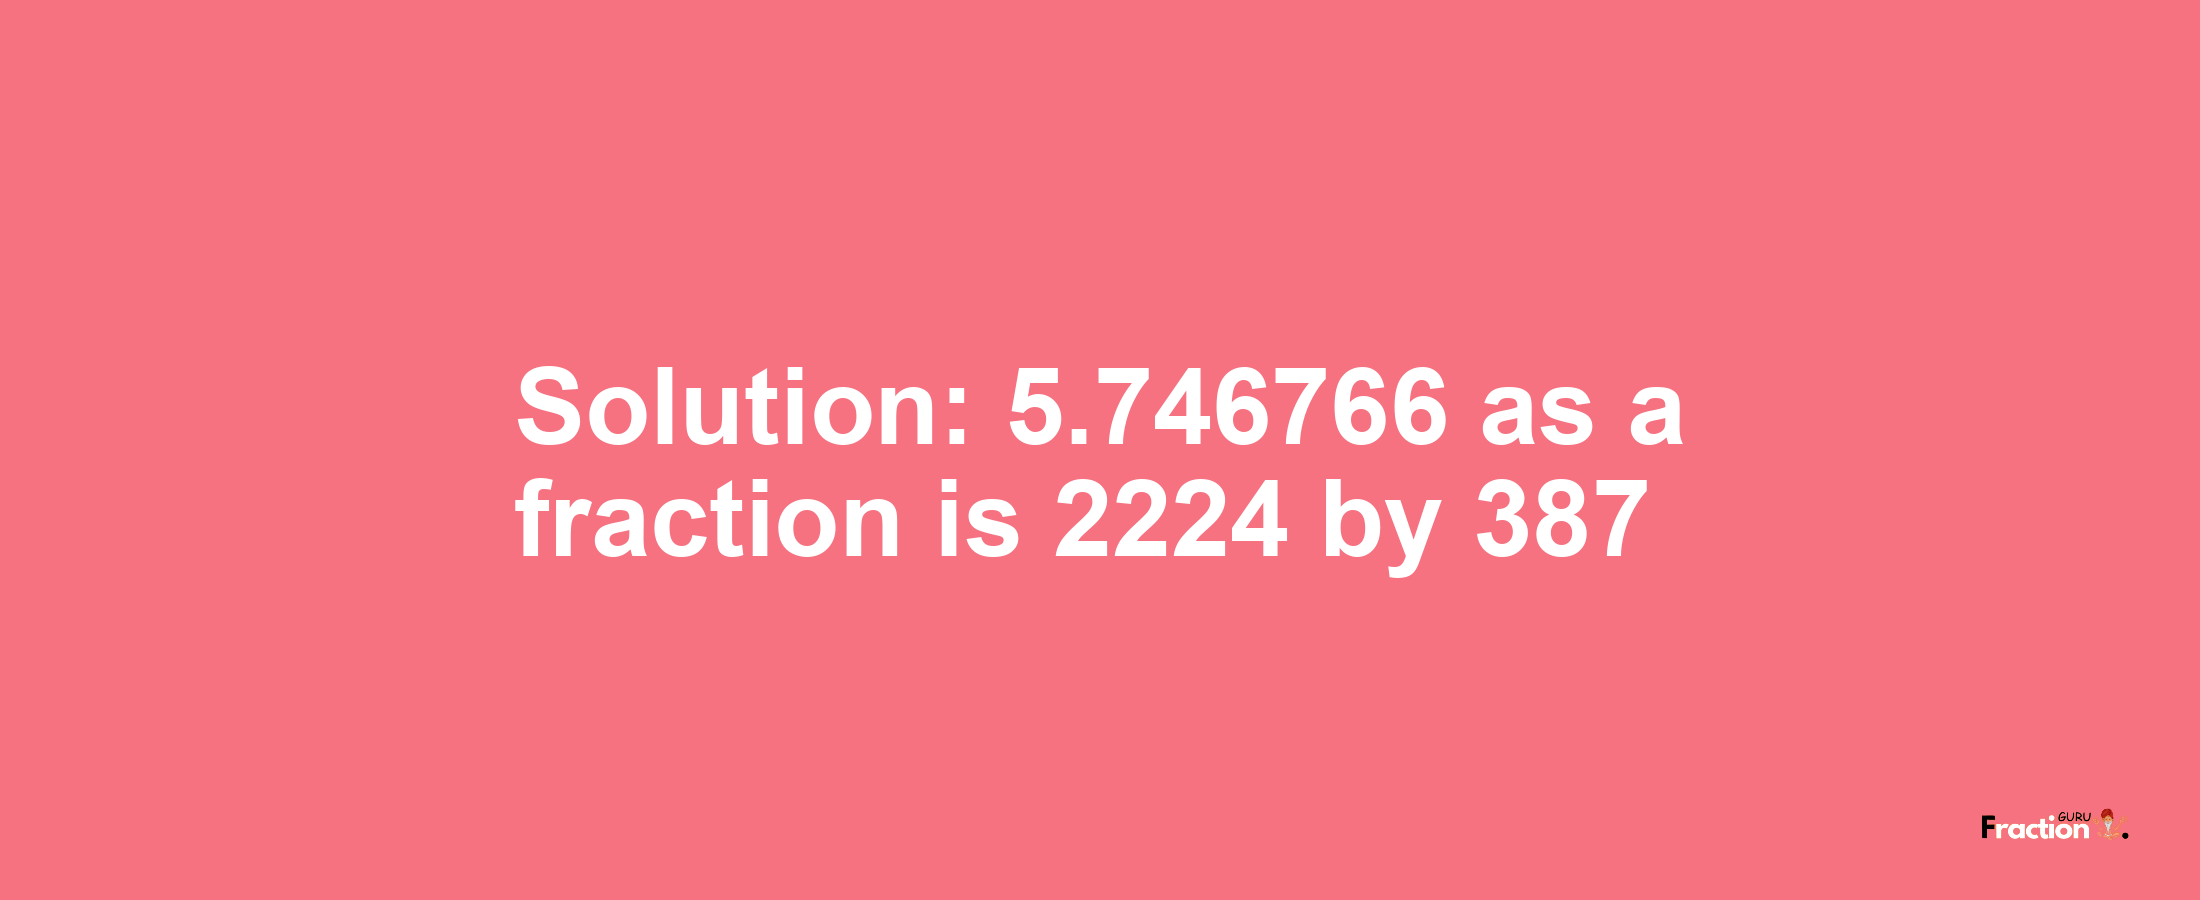 Solution:5.746766 as a fraction is 2224/387